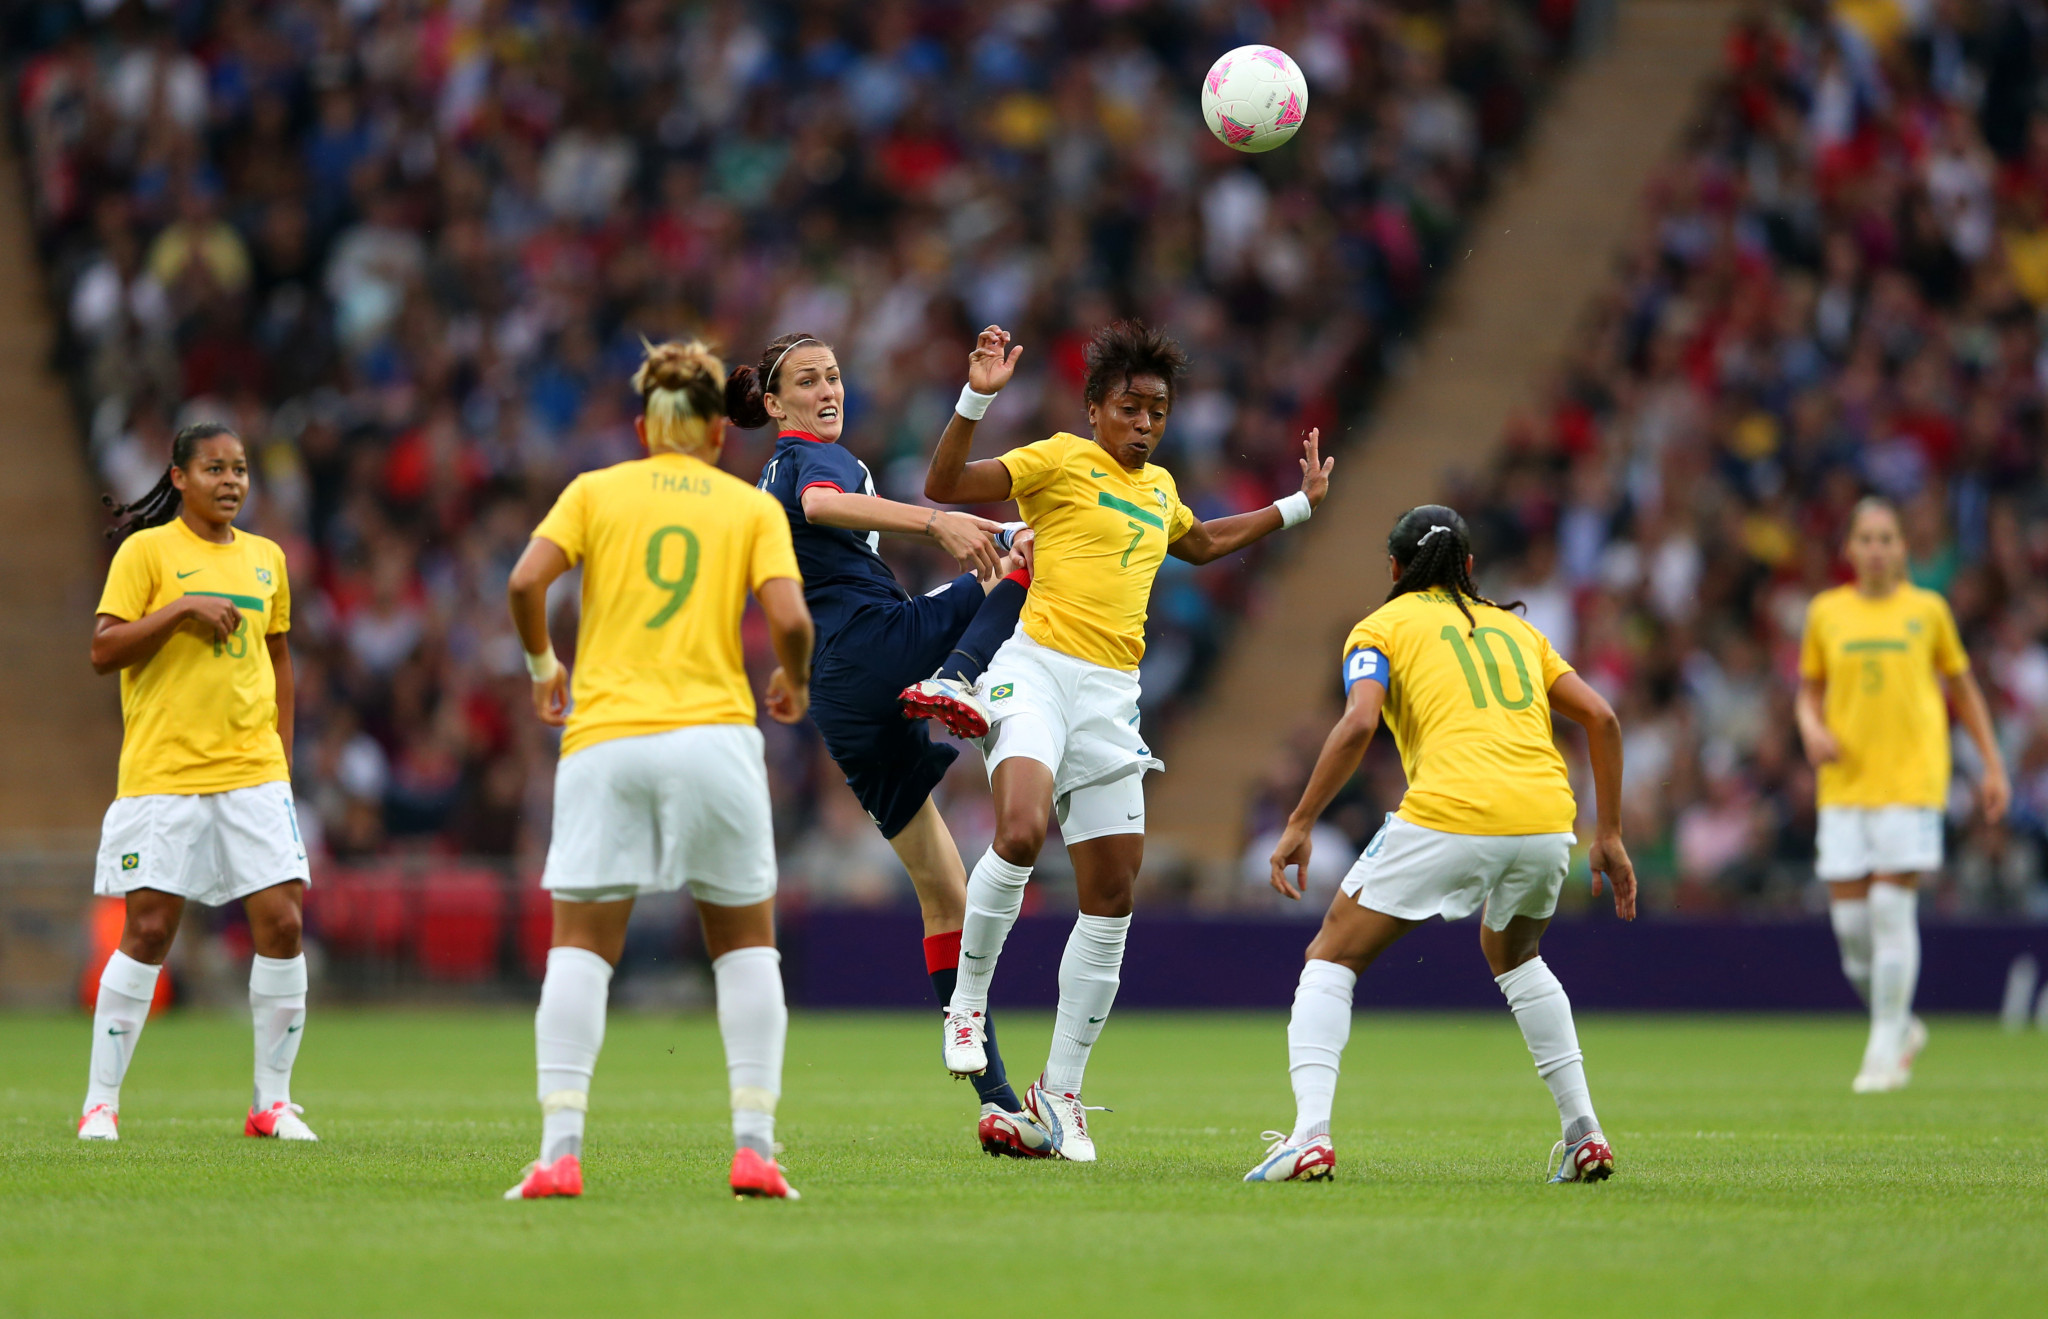 Brazil first played at Wembley Stadium in the 2012 Olympics when they lost 1-0 to Team GB ©Getty Images